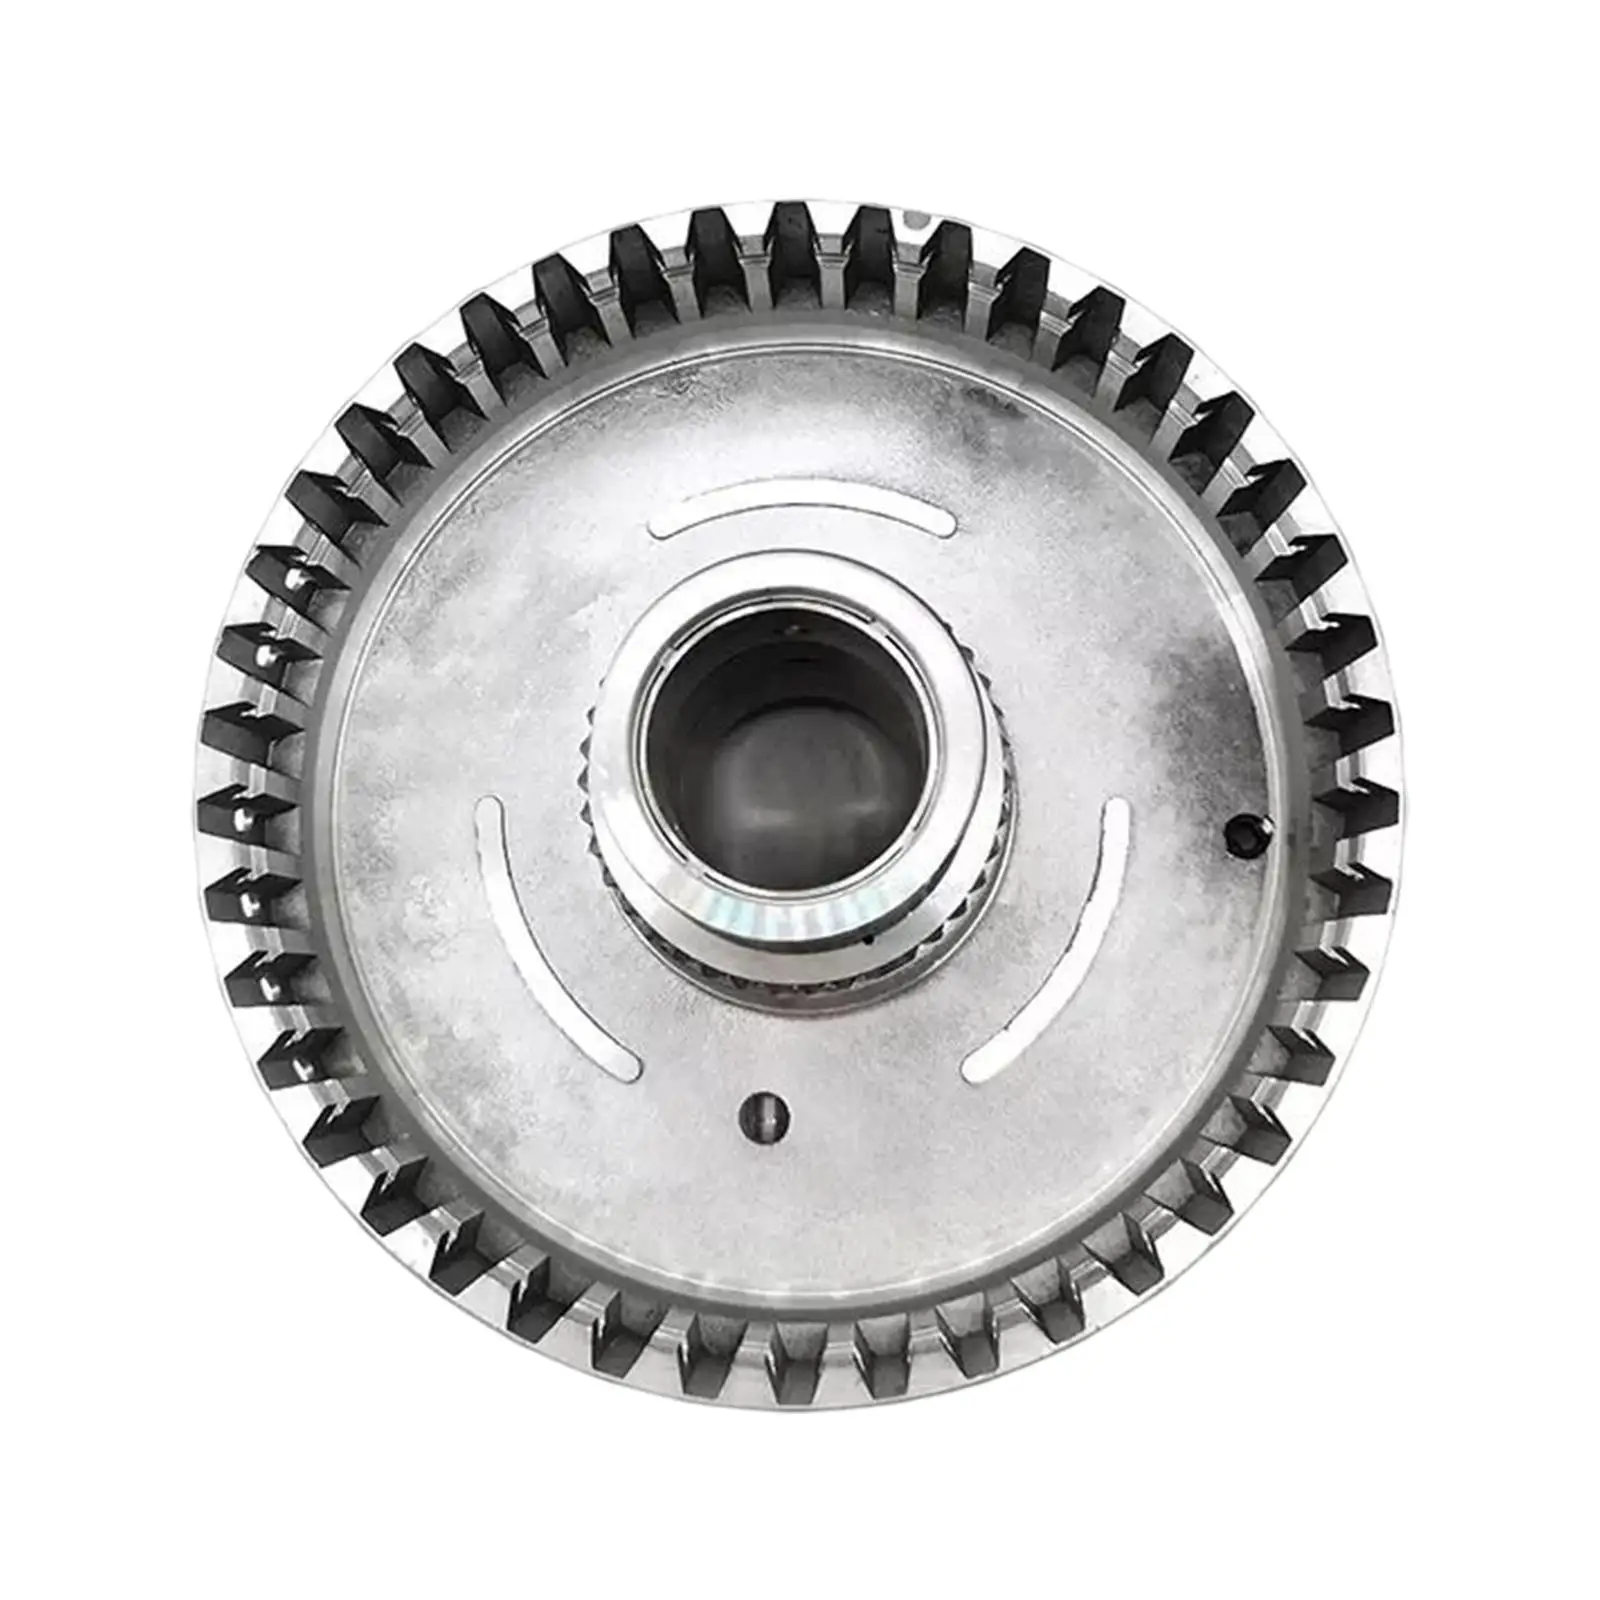 Automotive Clutch Auto Transmission Low Drum 1328157Ka-Qx Replacement Simple to Install